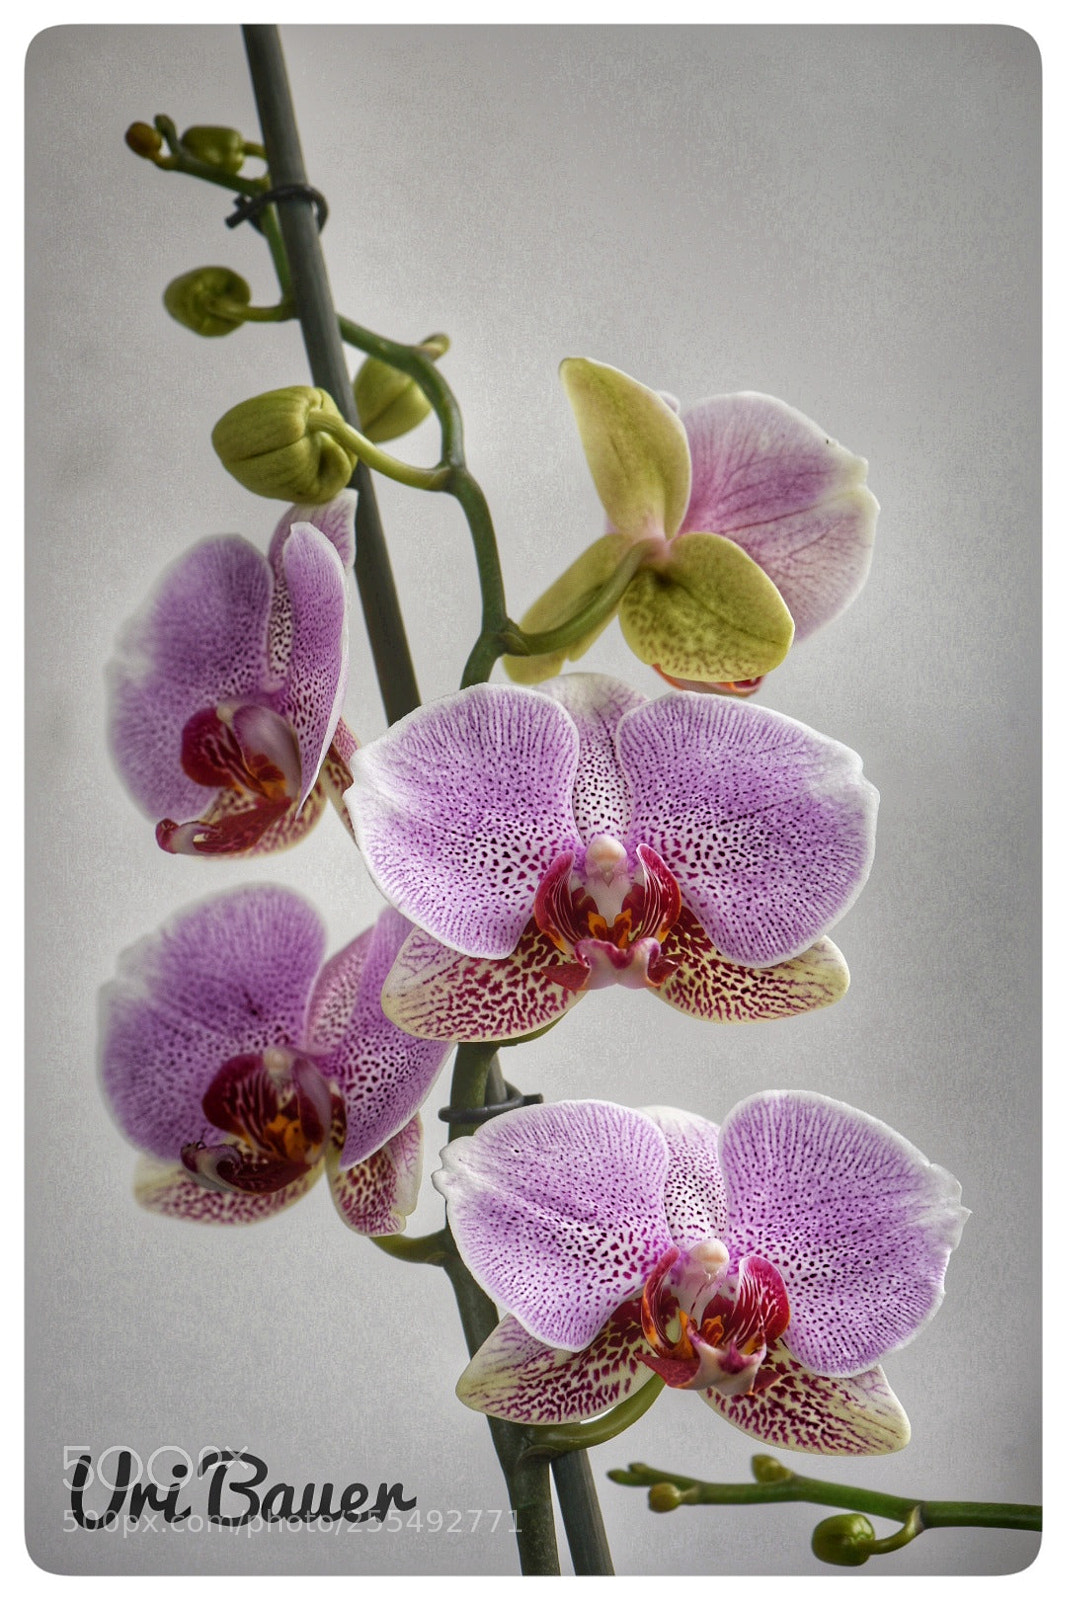 Nikon D750 sample photo. Orchid blossom photography